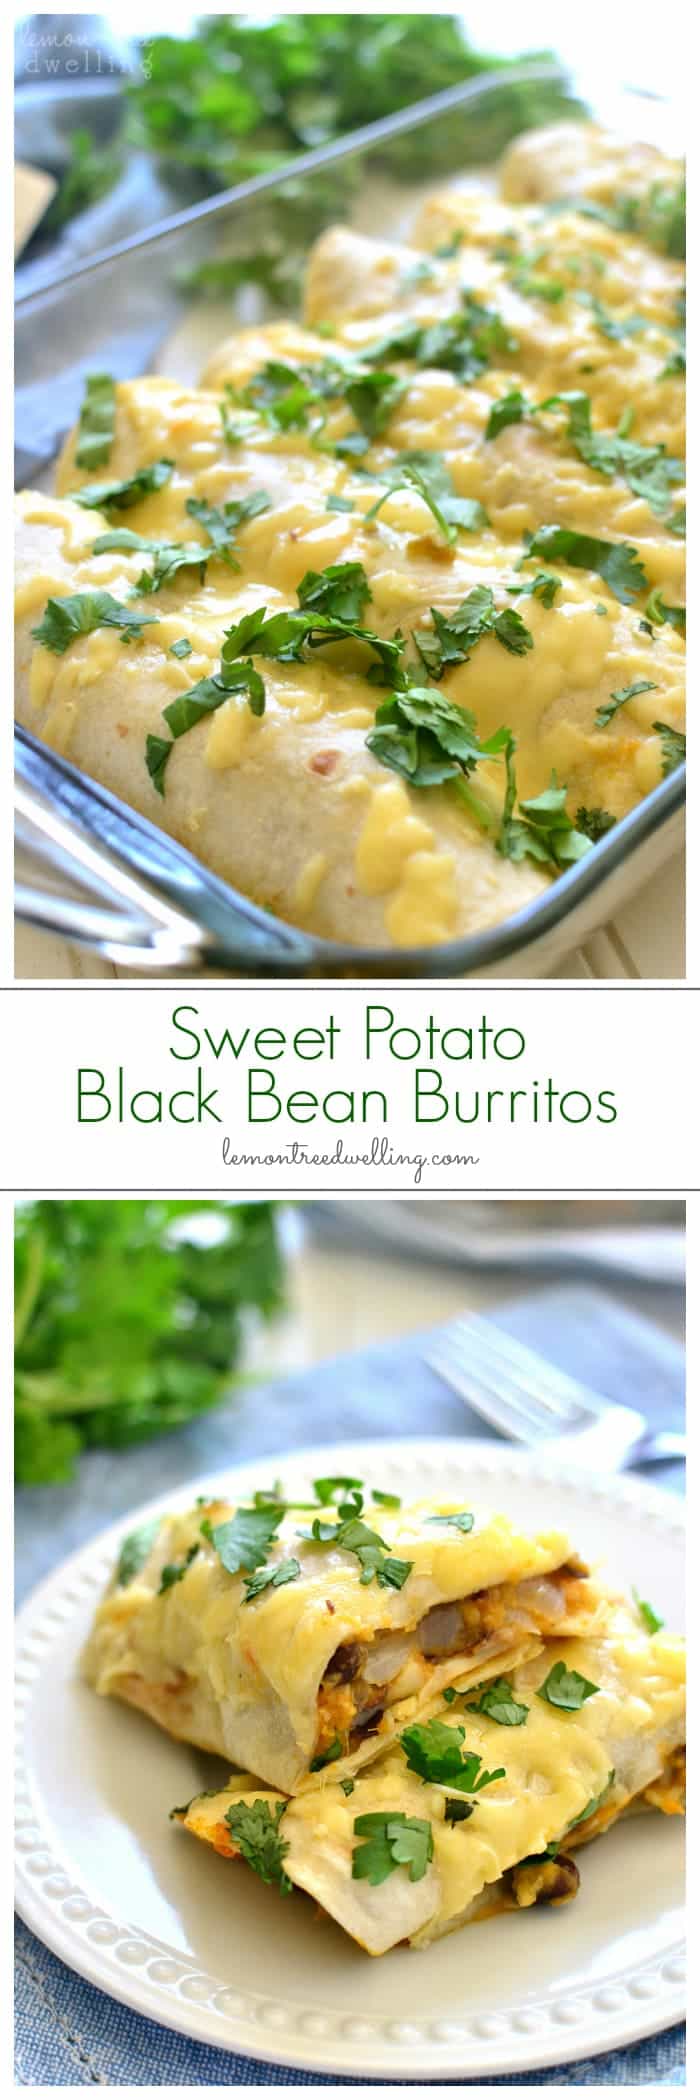 The BEST Sweet Potato Black Bean Burritos made with fresh sweet potatoes, black beans, cilantro, onions, and cheese. Make them ahead for a quick & easy weeknight meal!